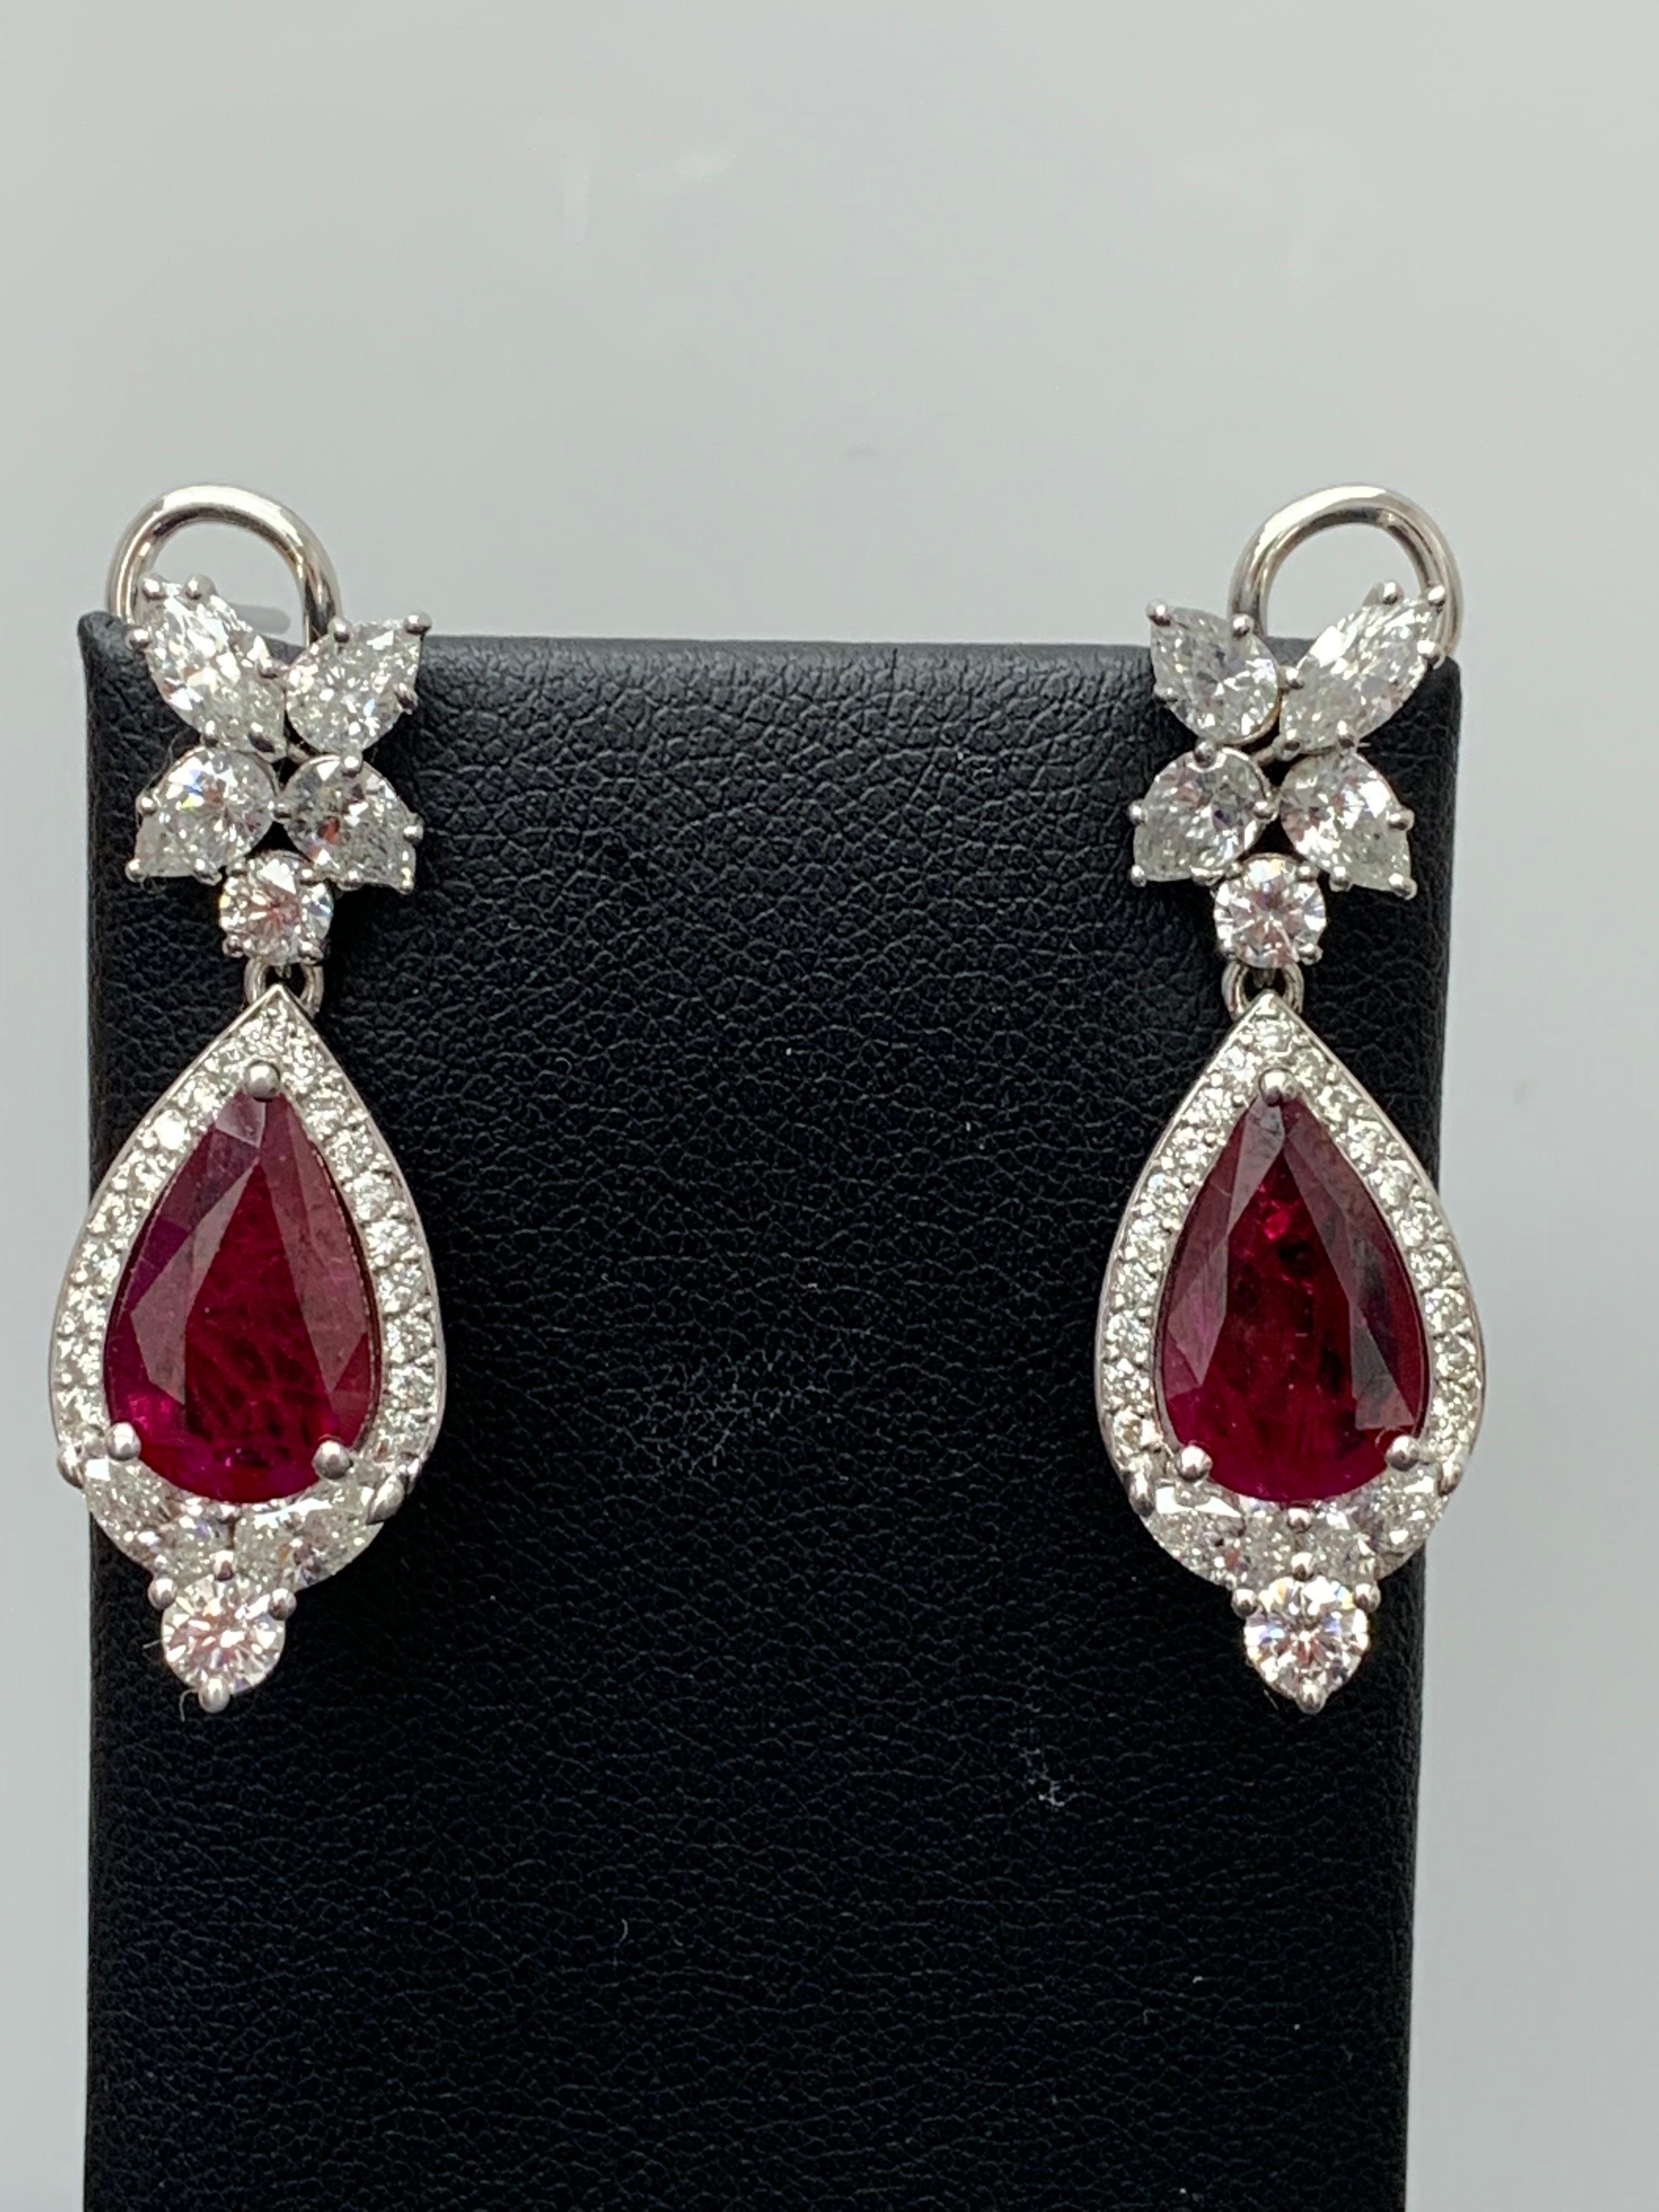 A beautiful and chic pair of drop earrings showcasing a cluster of brilliant mixed-cut diamonds, and 2 brilliant Pear shape Rubies set in an intricate and stylish design.  10 Mixed cut Diamonds weigh 1.91 carats in total. 2 rubies weigh 4.73 carats